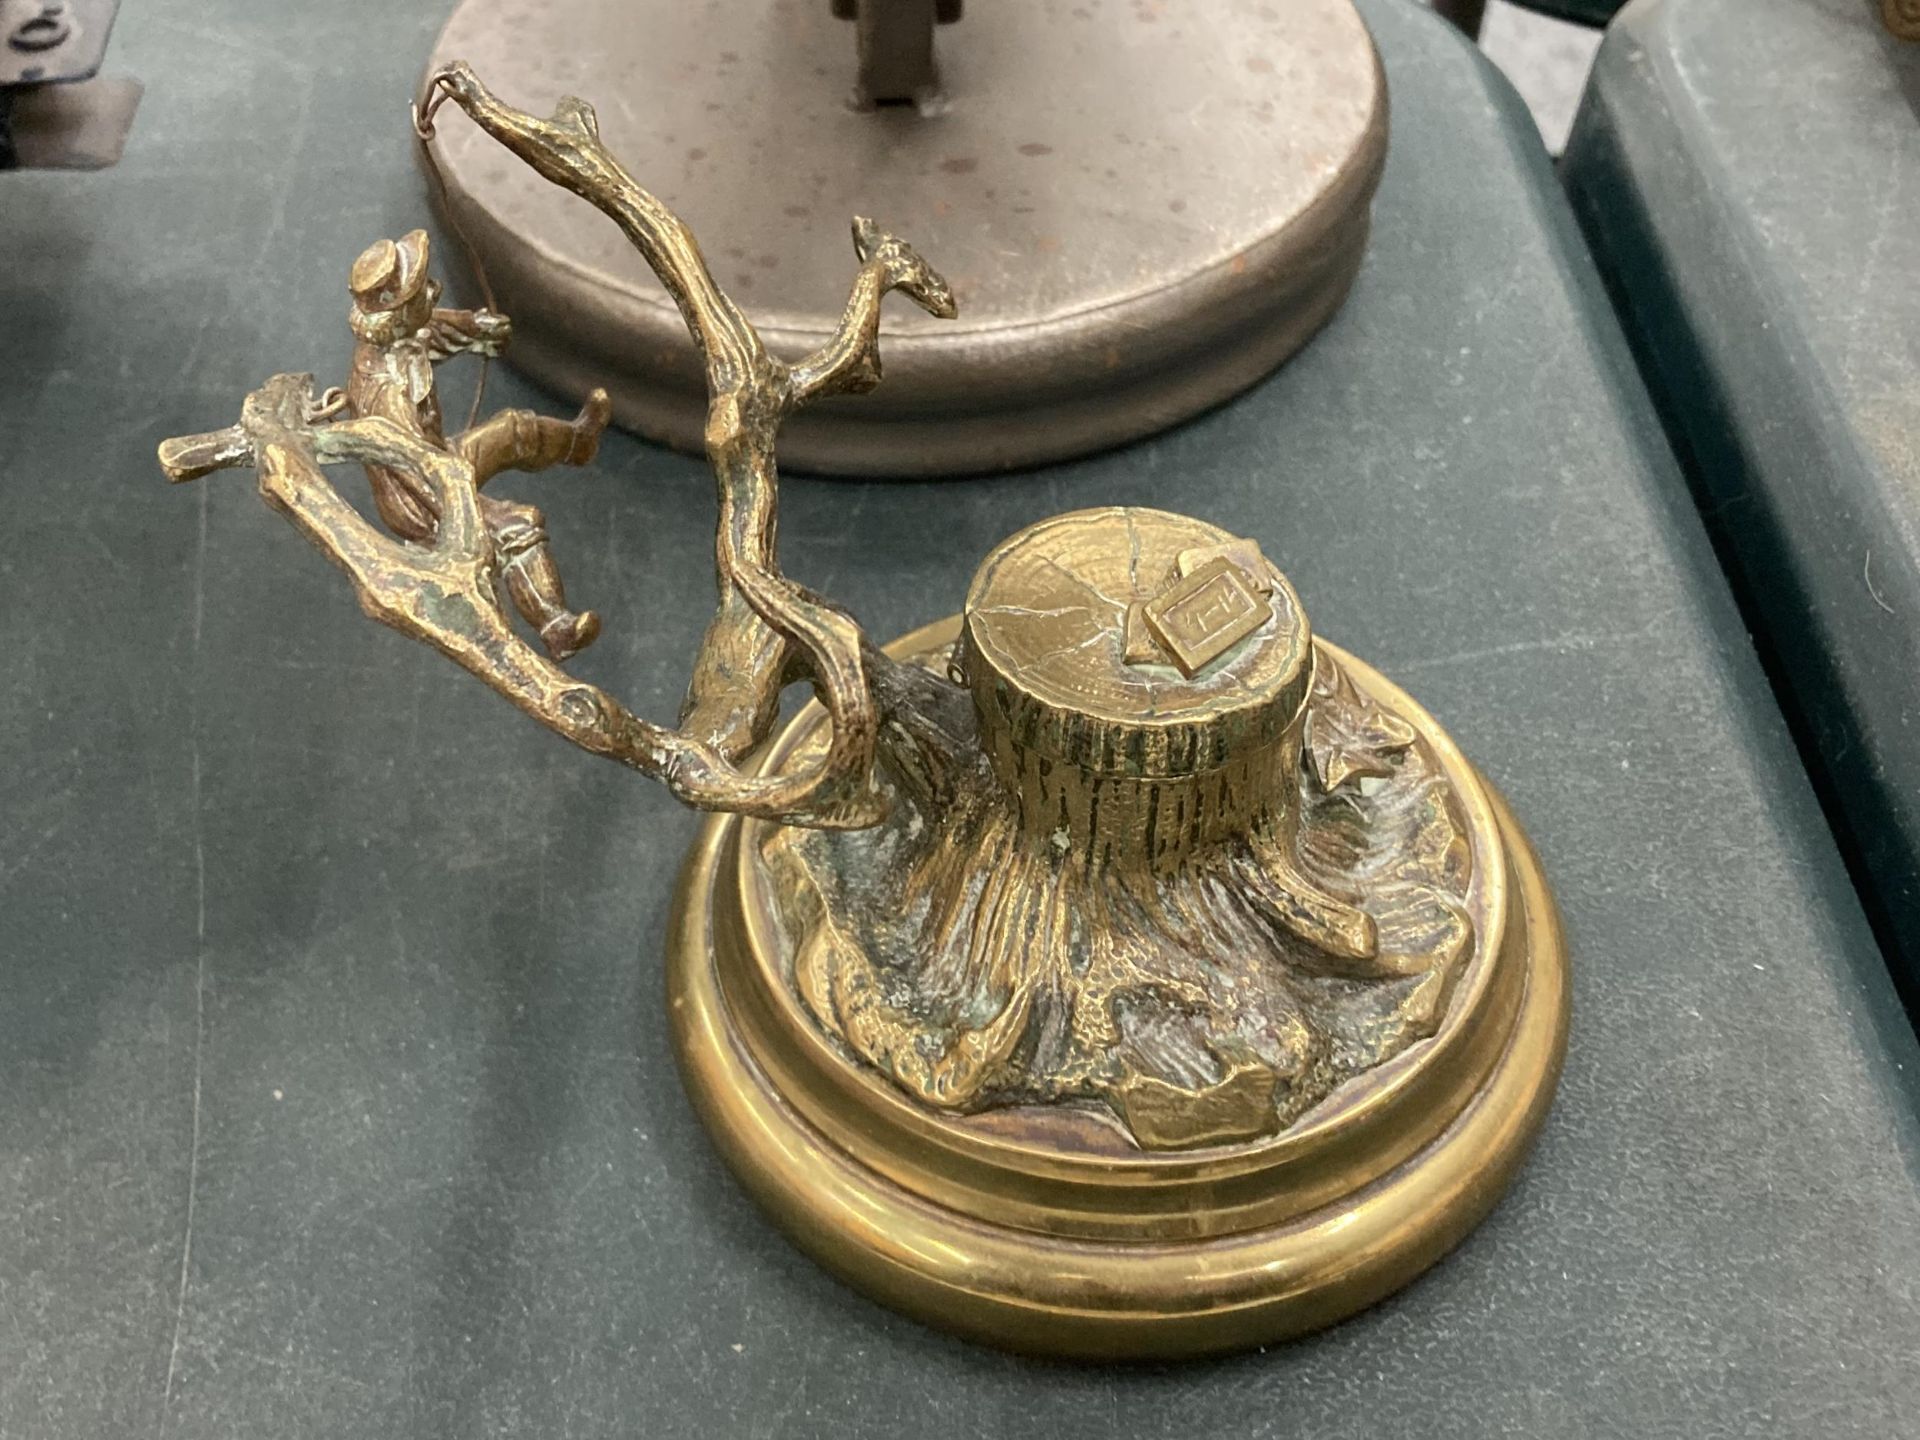 A VINTAGE NOVELTY BRASS INKWELL WITH A SINGING BOY IN A TREE - Image 2 of 4